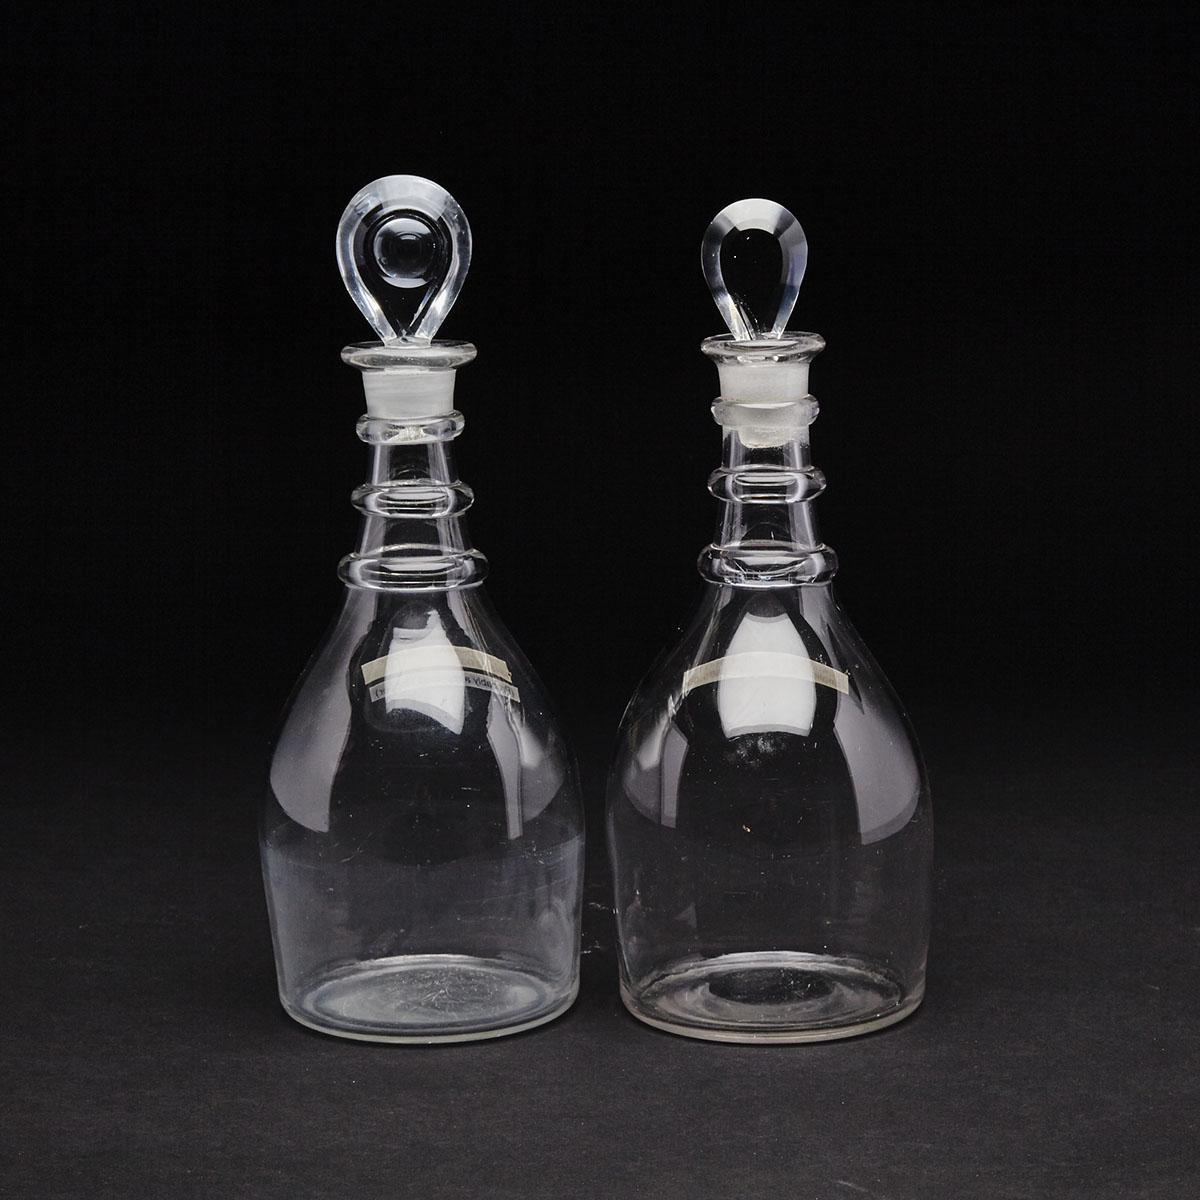 Two English Blown Glass Decanters, c.1800